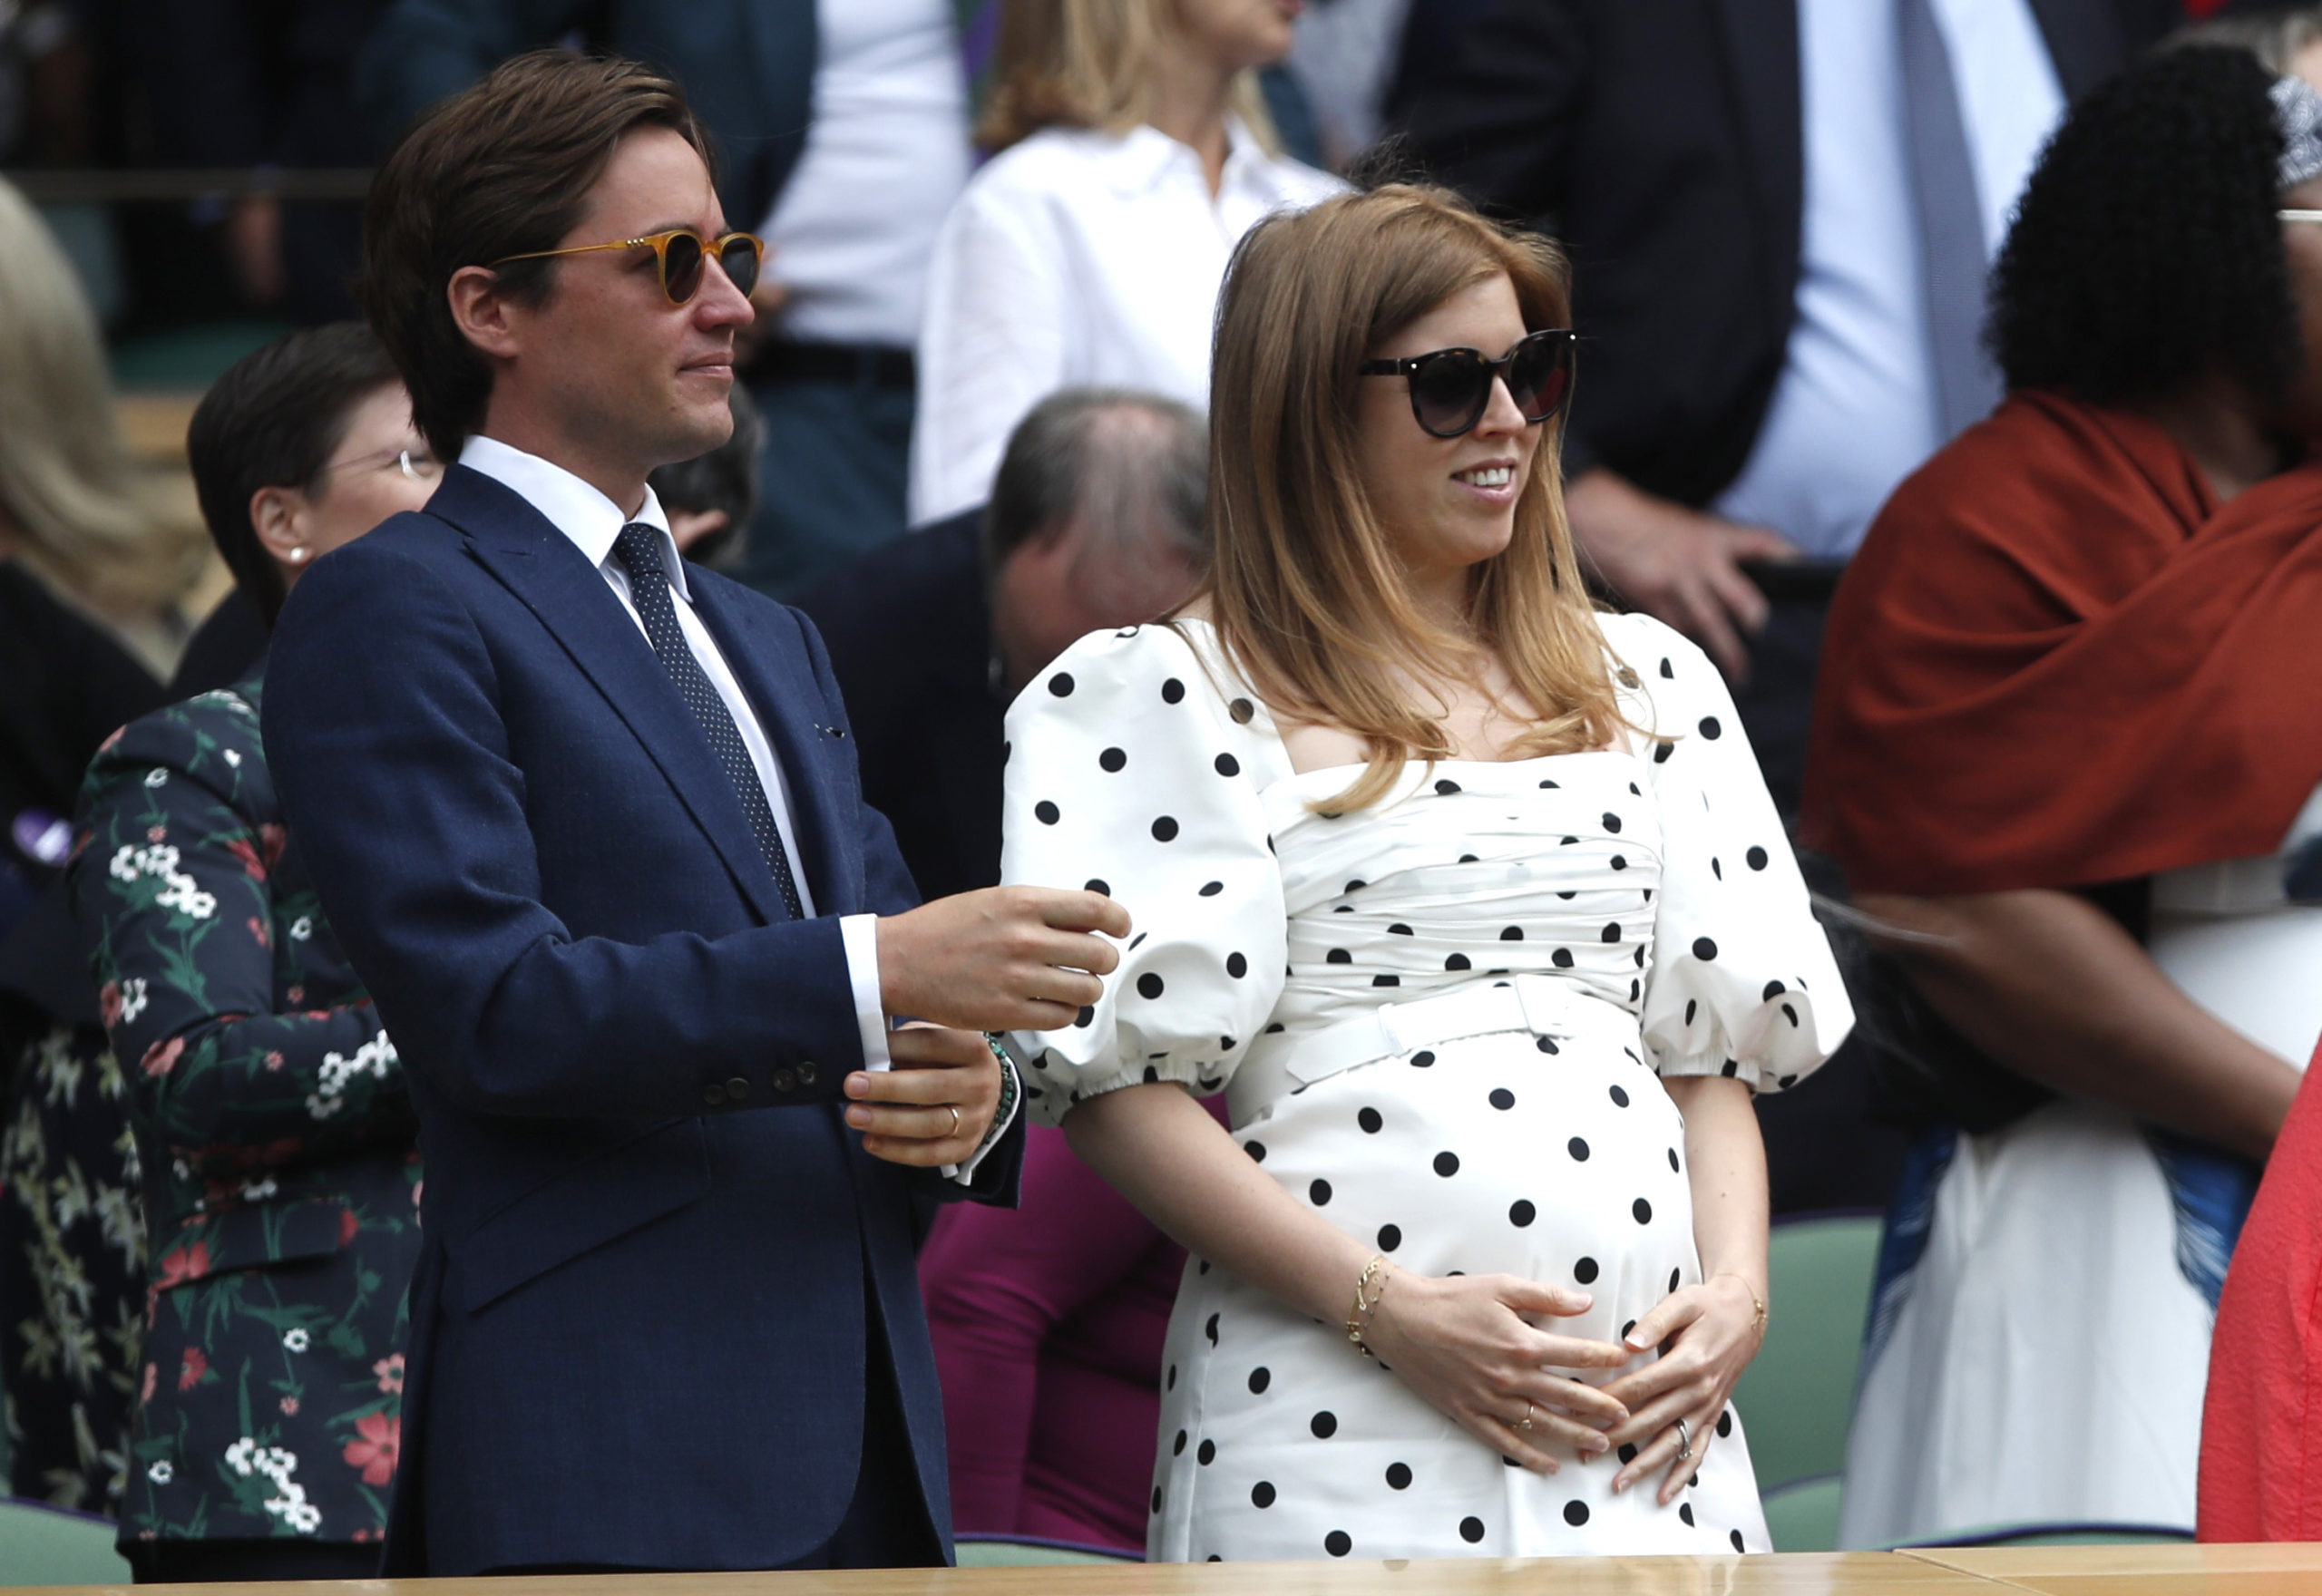 Queen’s Granddaughter Princess Beatrice and Edo Mozzi Announce Daugher’s birth! Name not yet Revealed